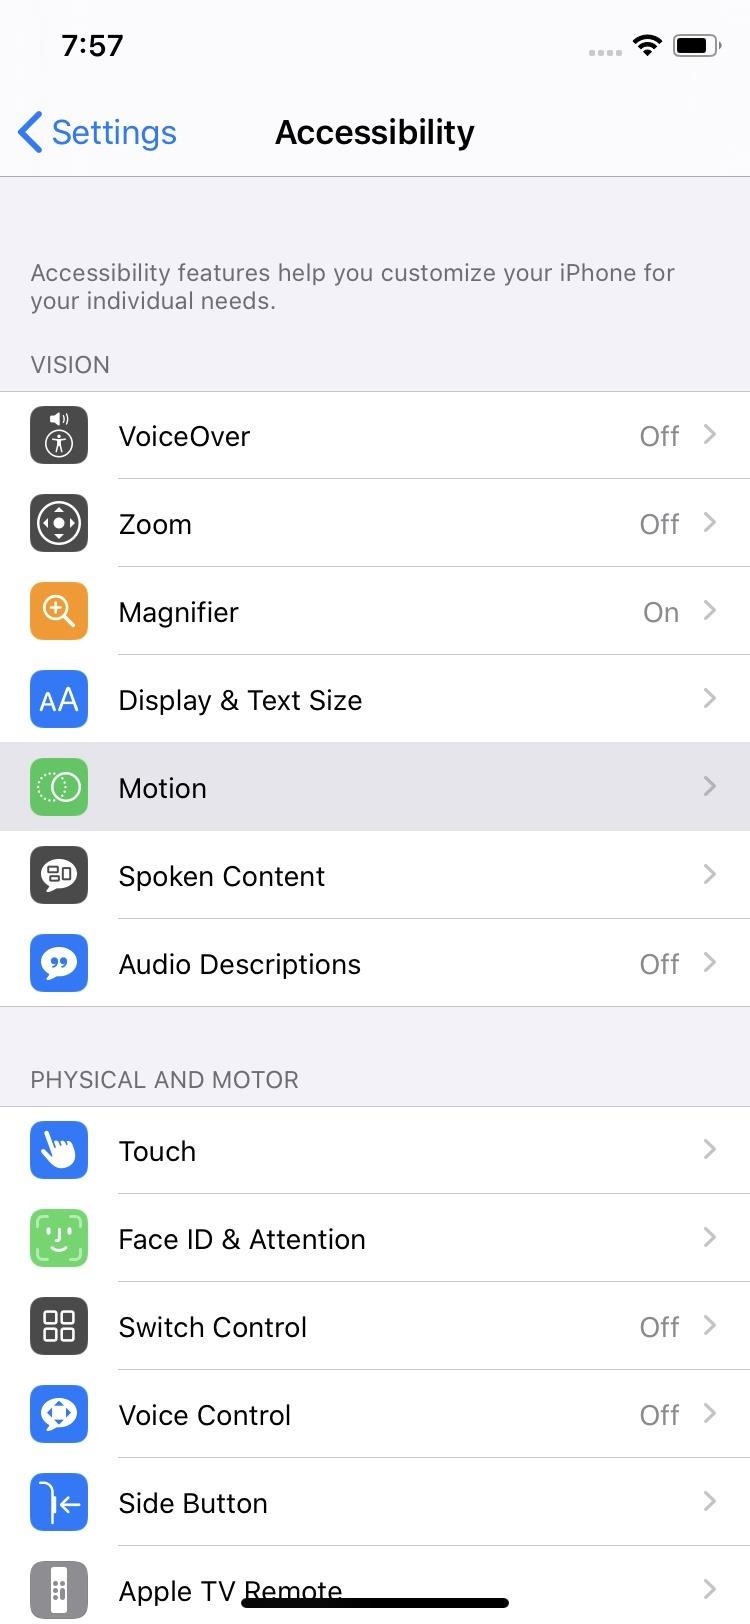 How to Disable Message Effects from Auto-Playing on Your iPhone